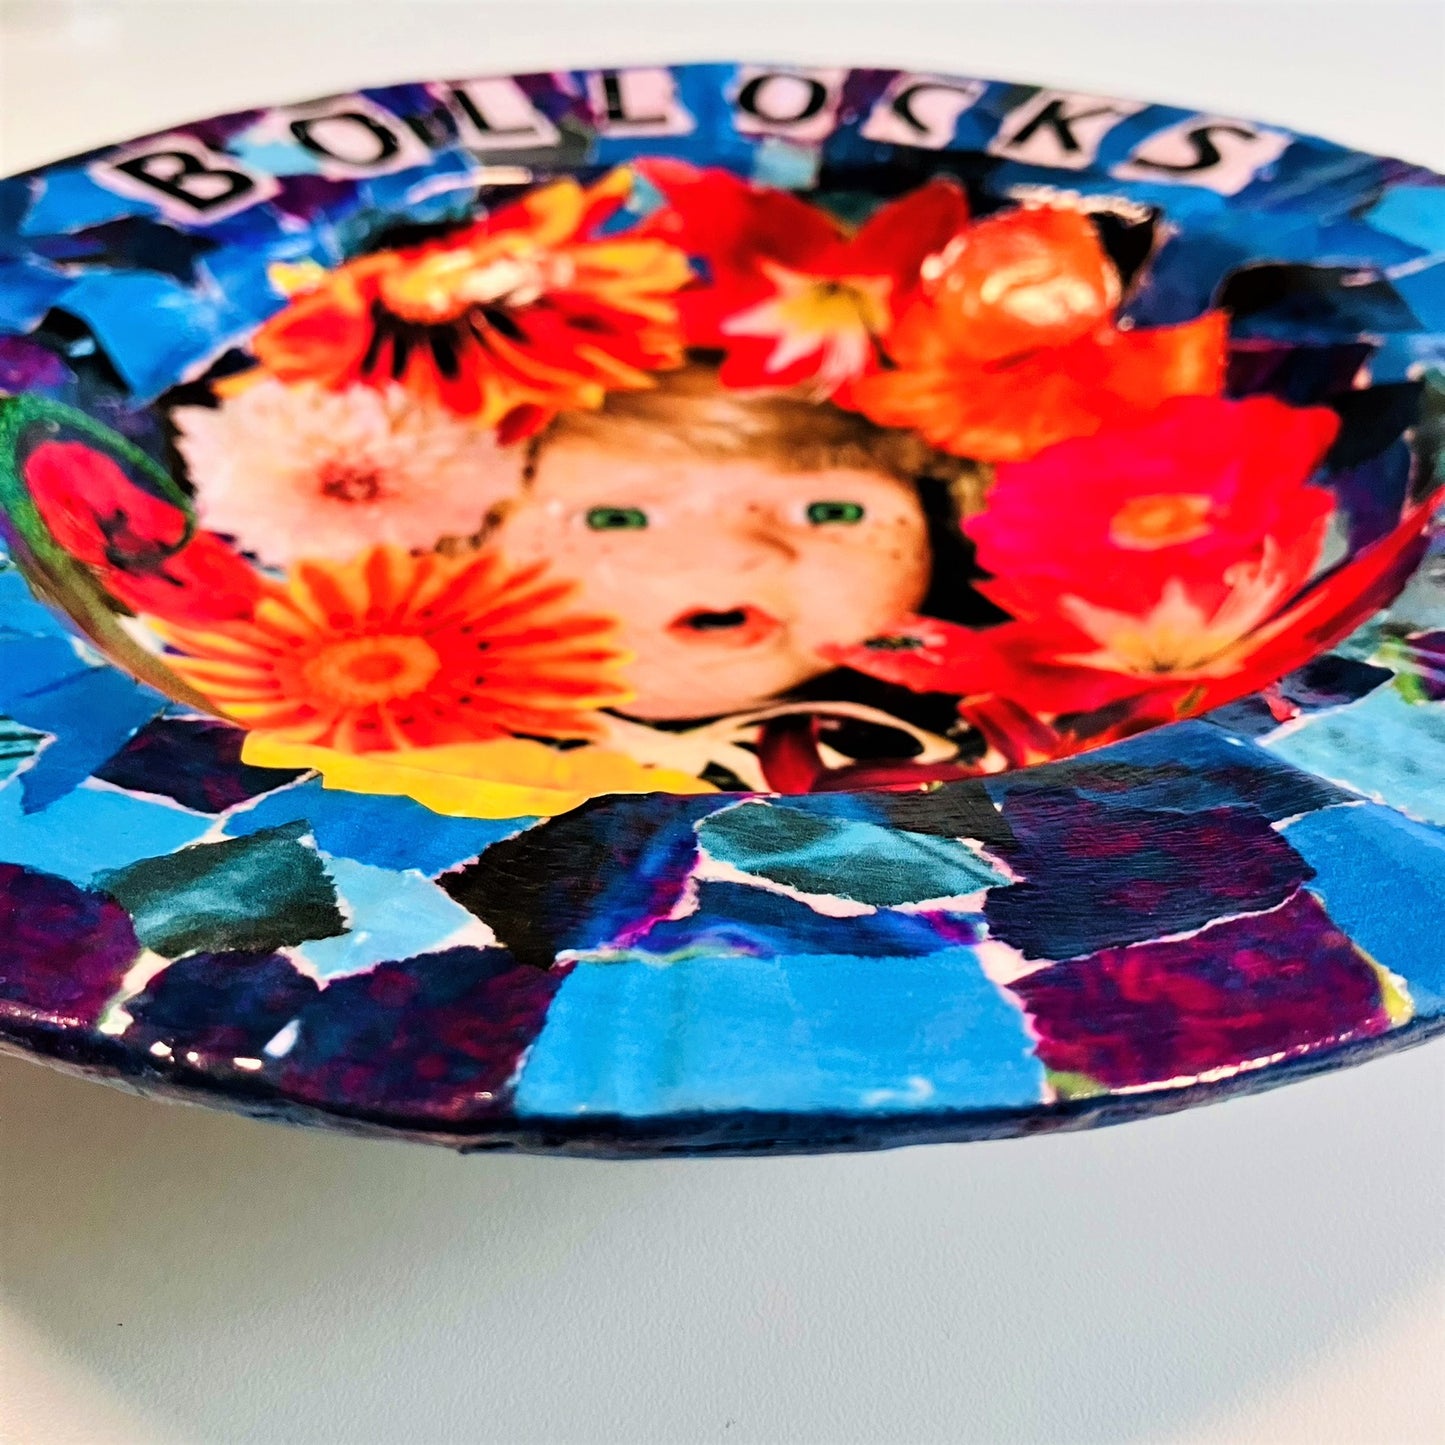 "Bollocks" Wall Plate by House of Frisson, featuring a collage of a vintage male doll surrounded by flowers and a lizard, on a blue background. Closeup details showing blue background.